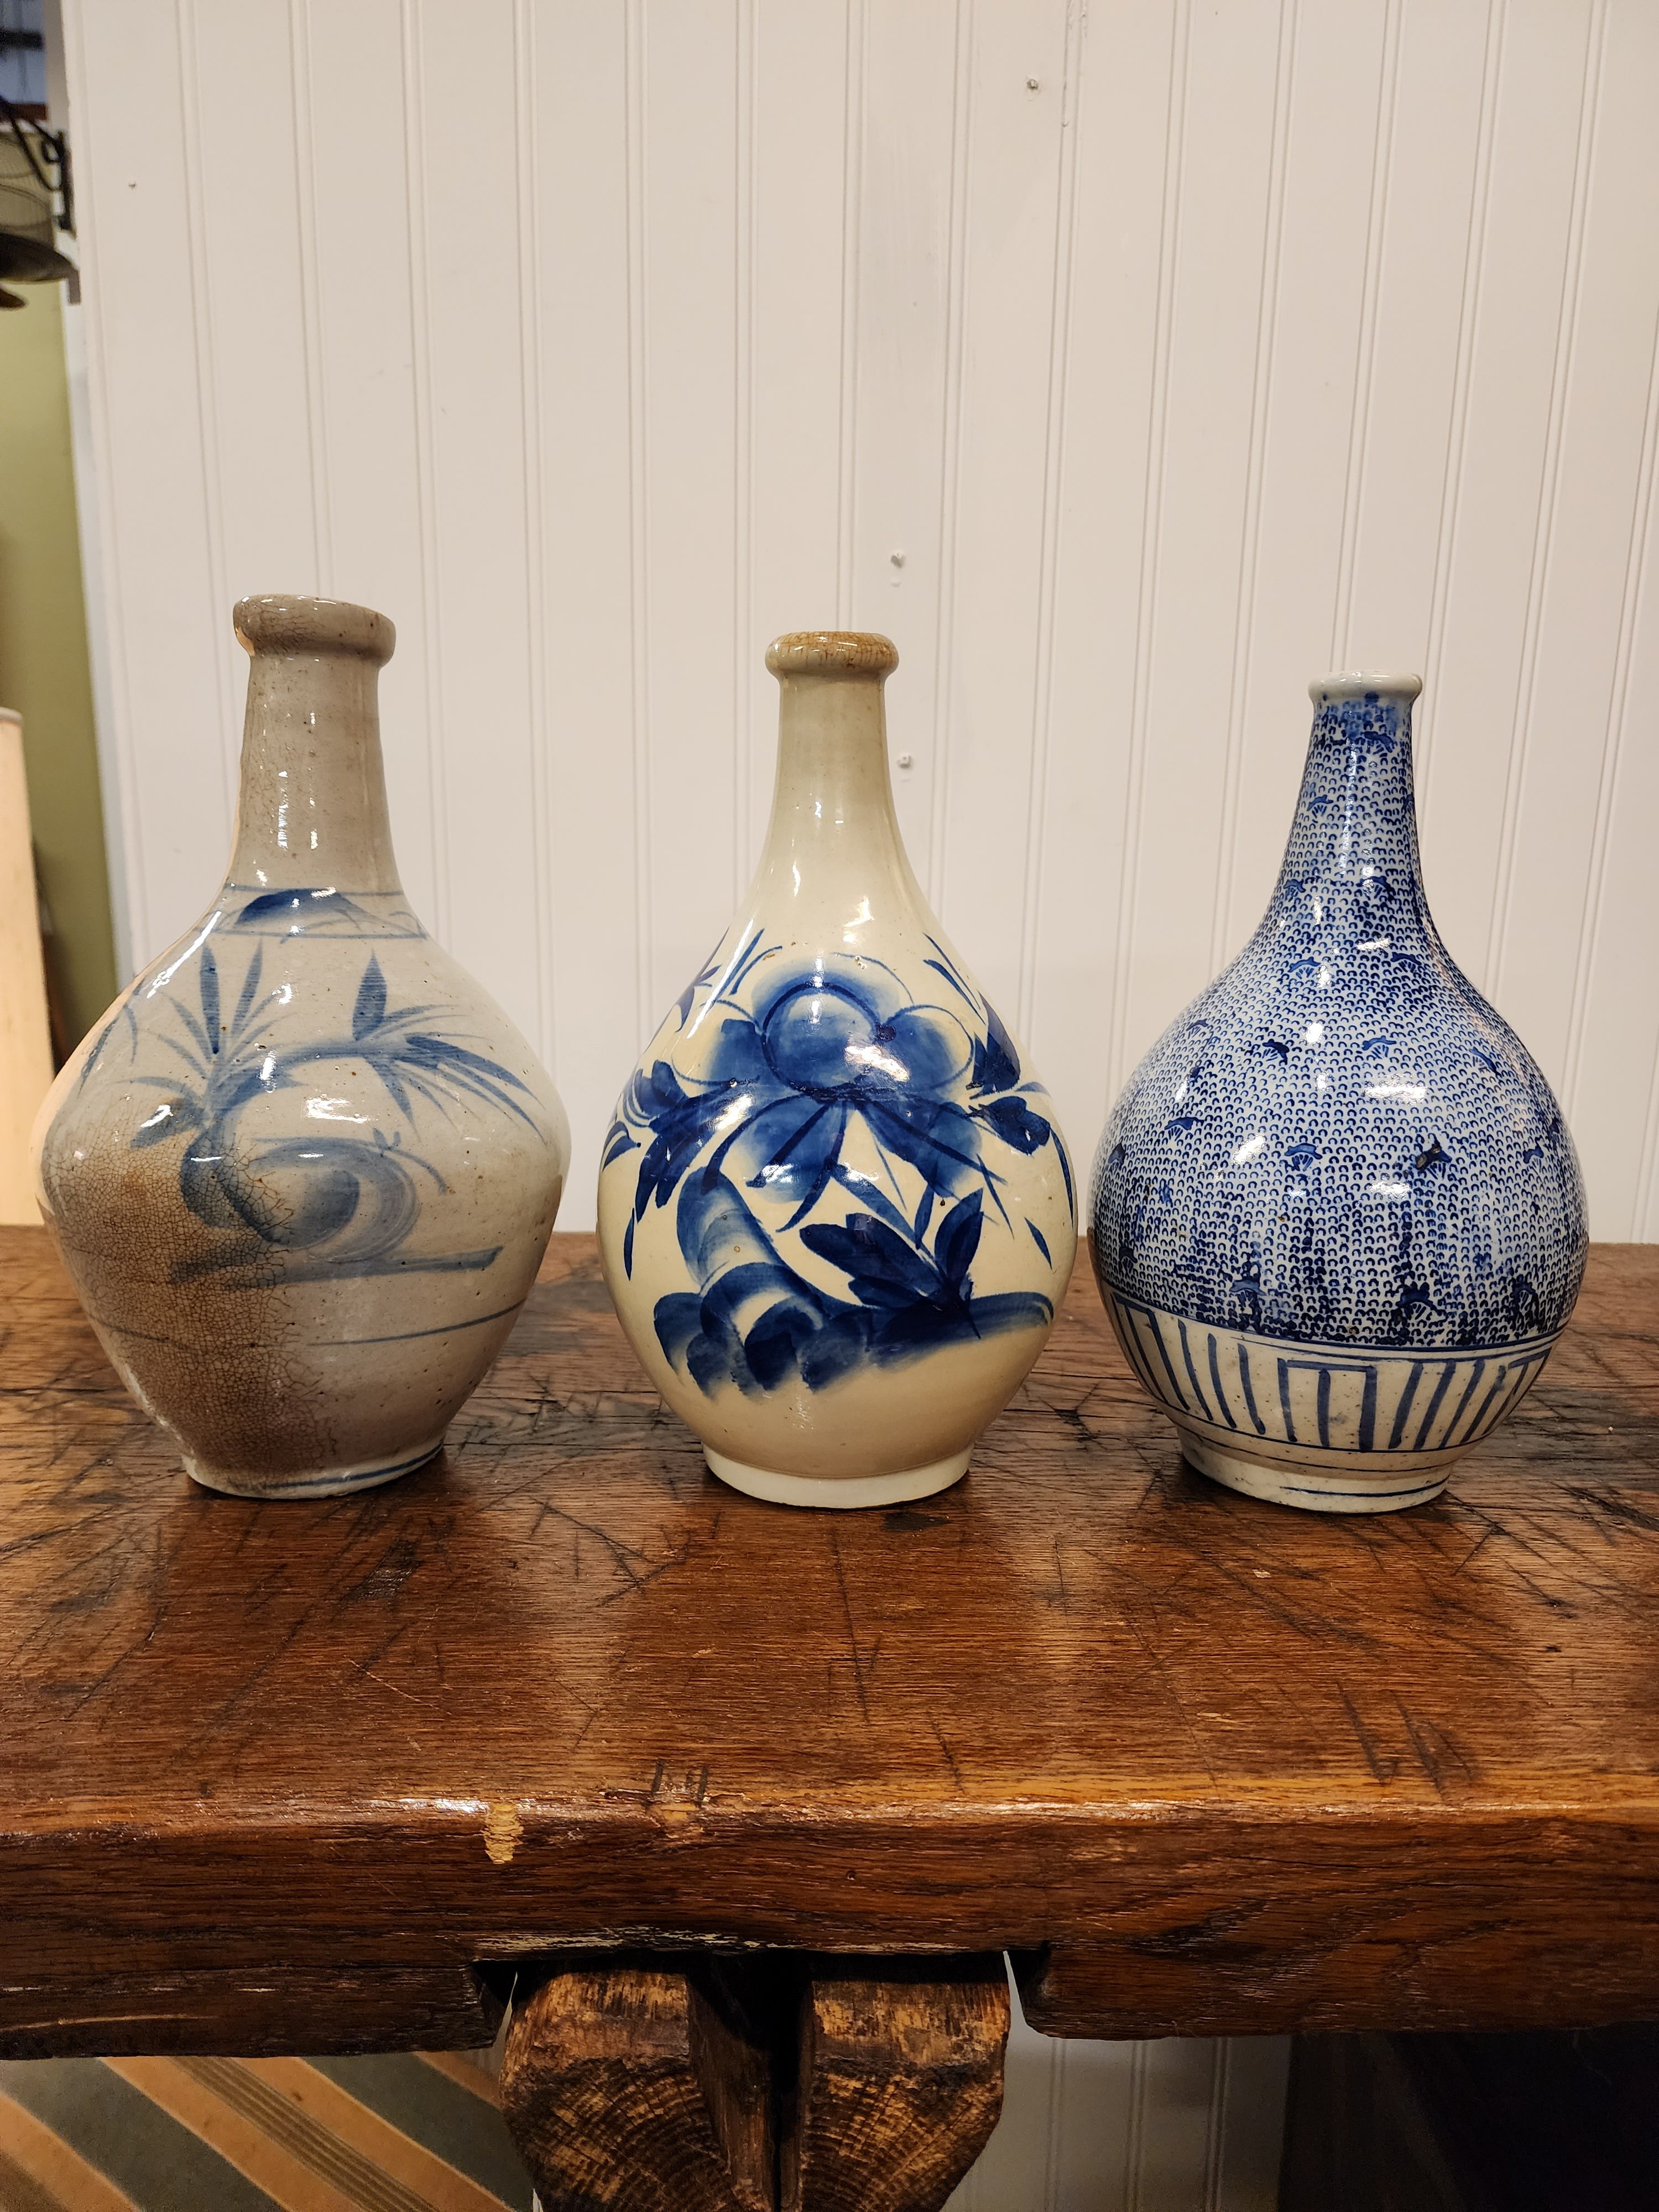 A lovely set of three Japanese mid 19th century sake bottles, circa 1840-50's, each with distinctive decoration and construction.
These can be used as lamps, vases, or even for decanters.
Purchased as a collection from an estate in Yarmouth Port